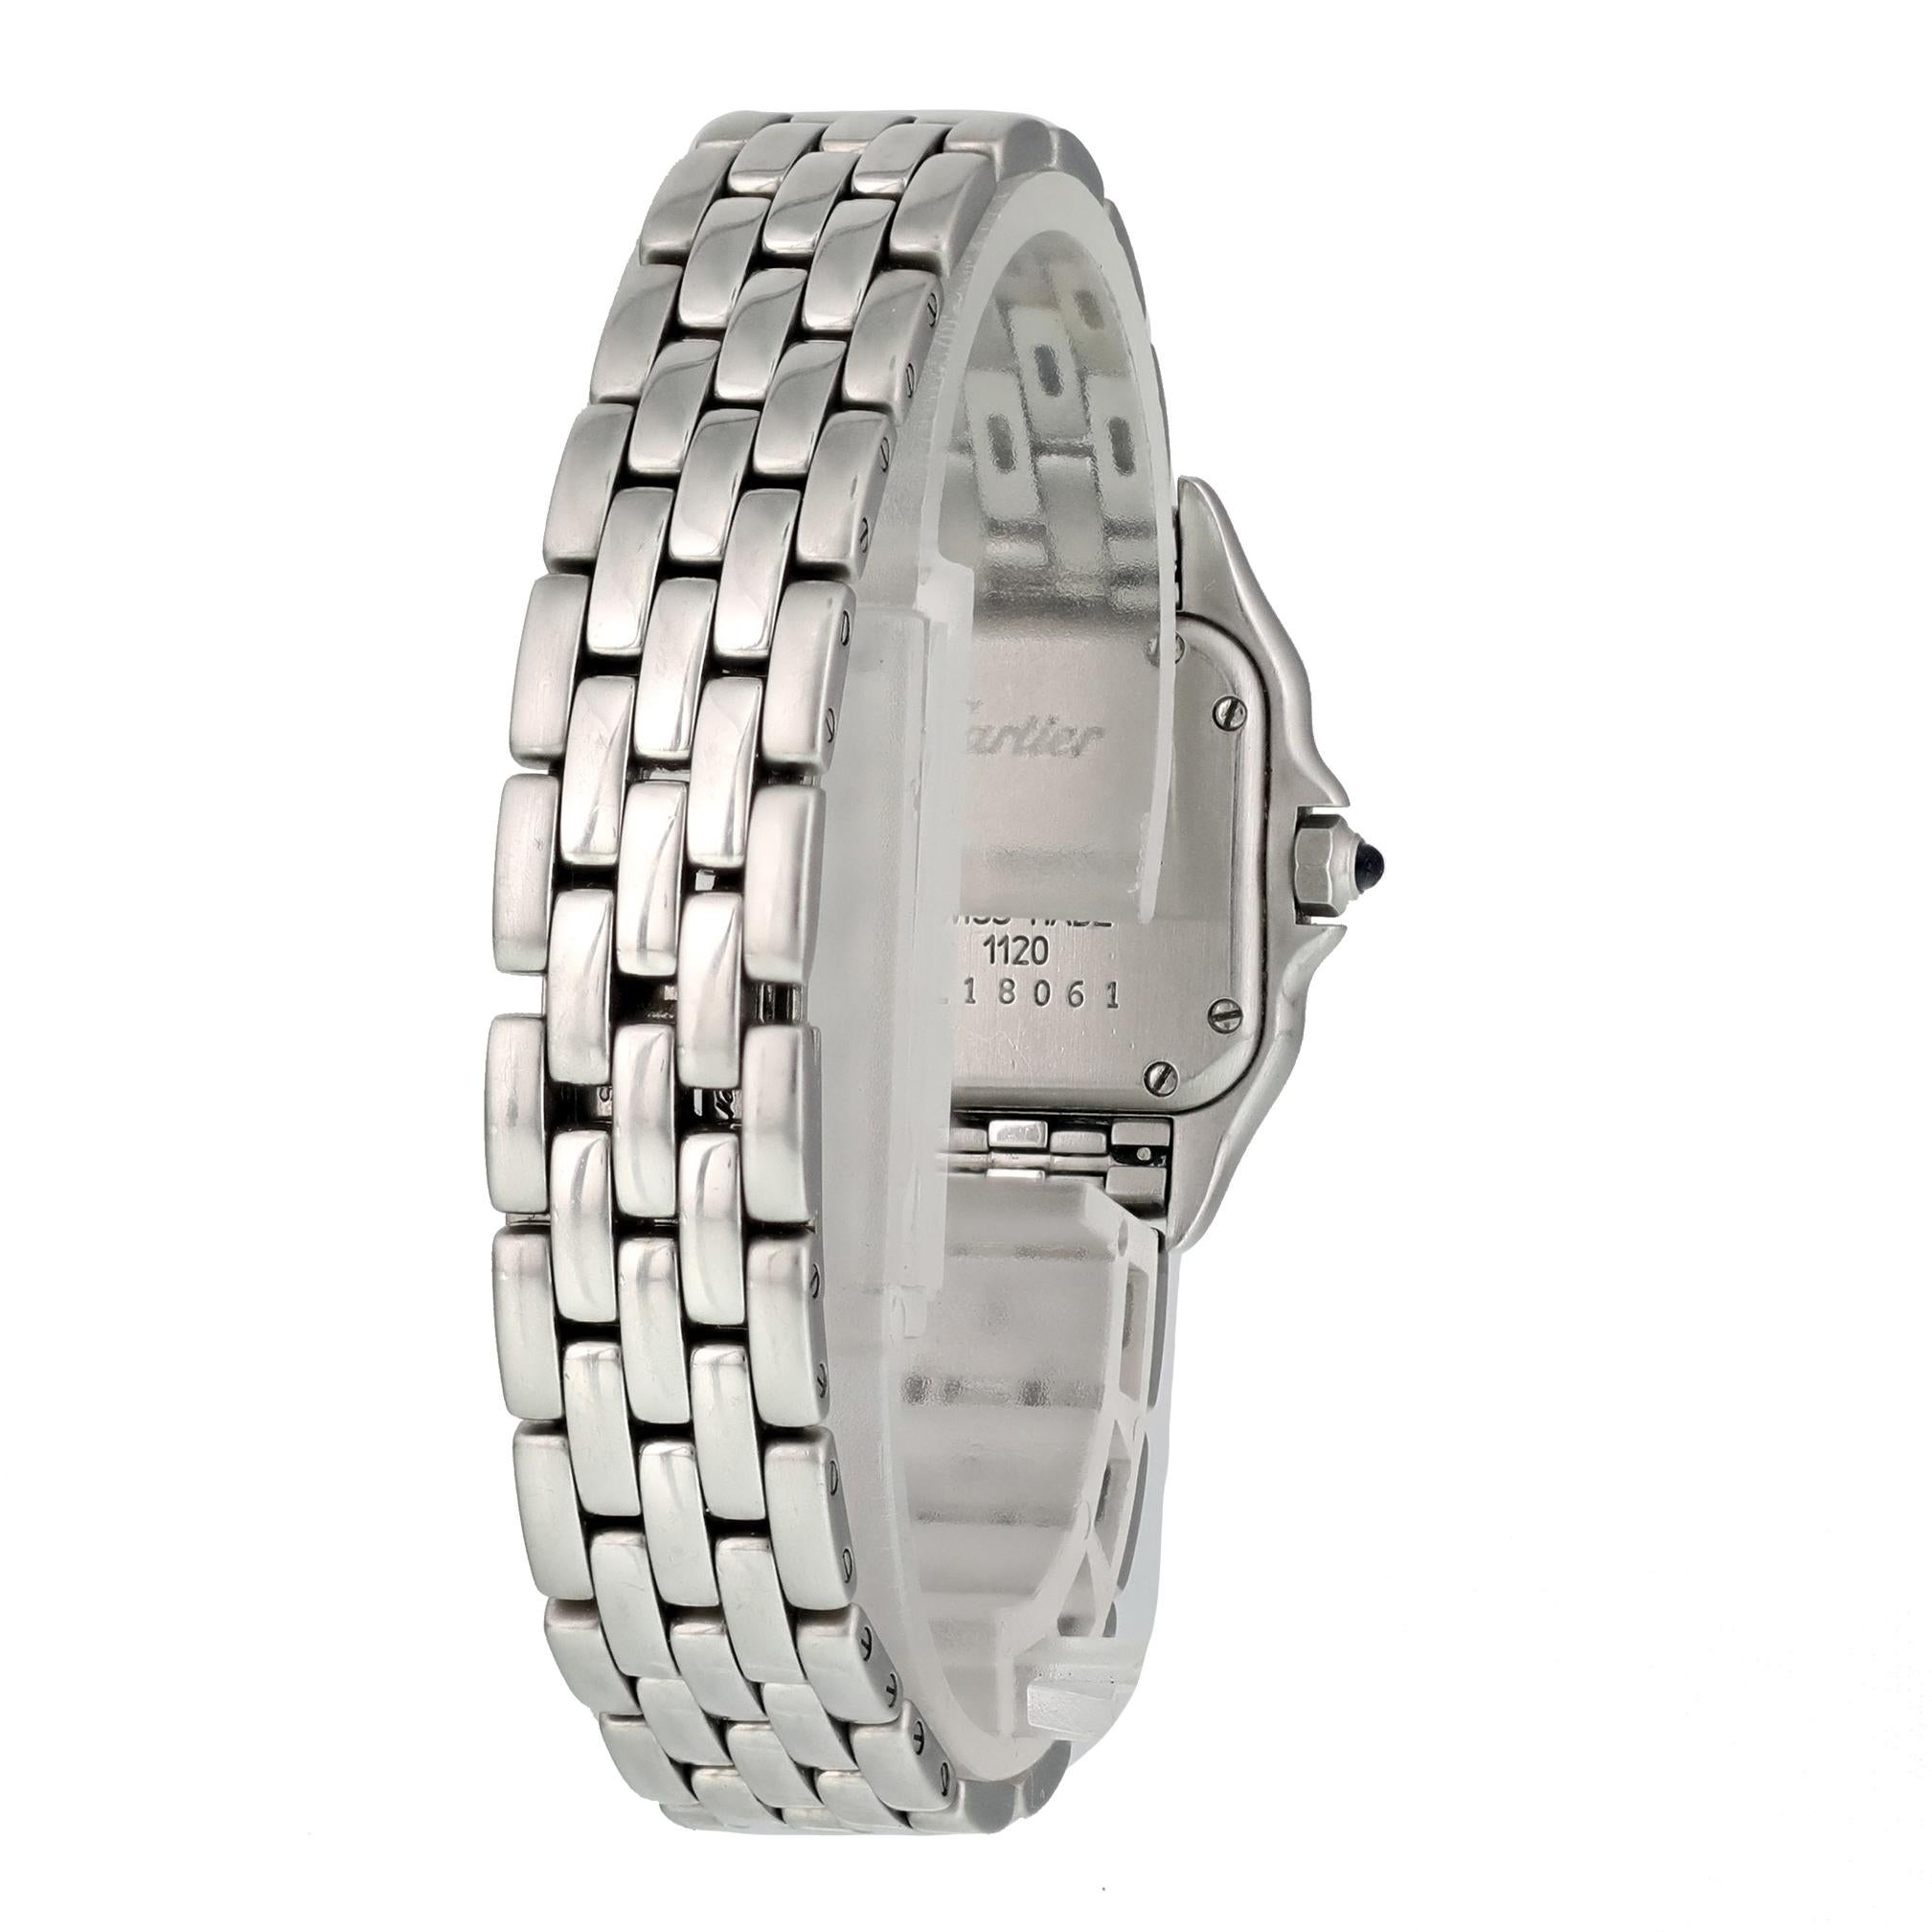 Women's Cartier Panthere 1120 Stainless Steel Ladies Watch